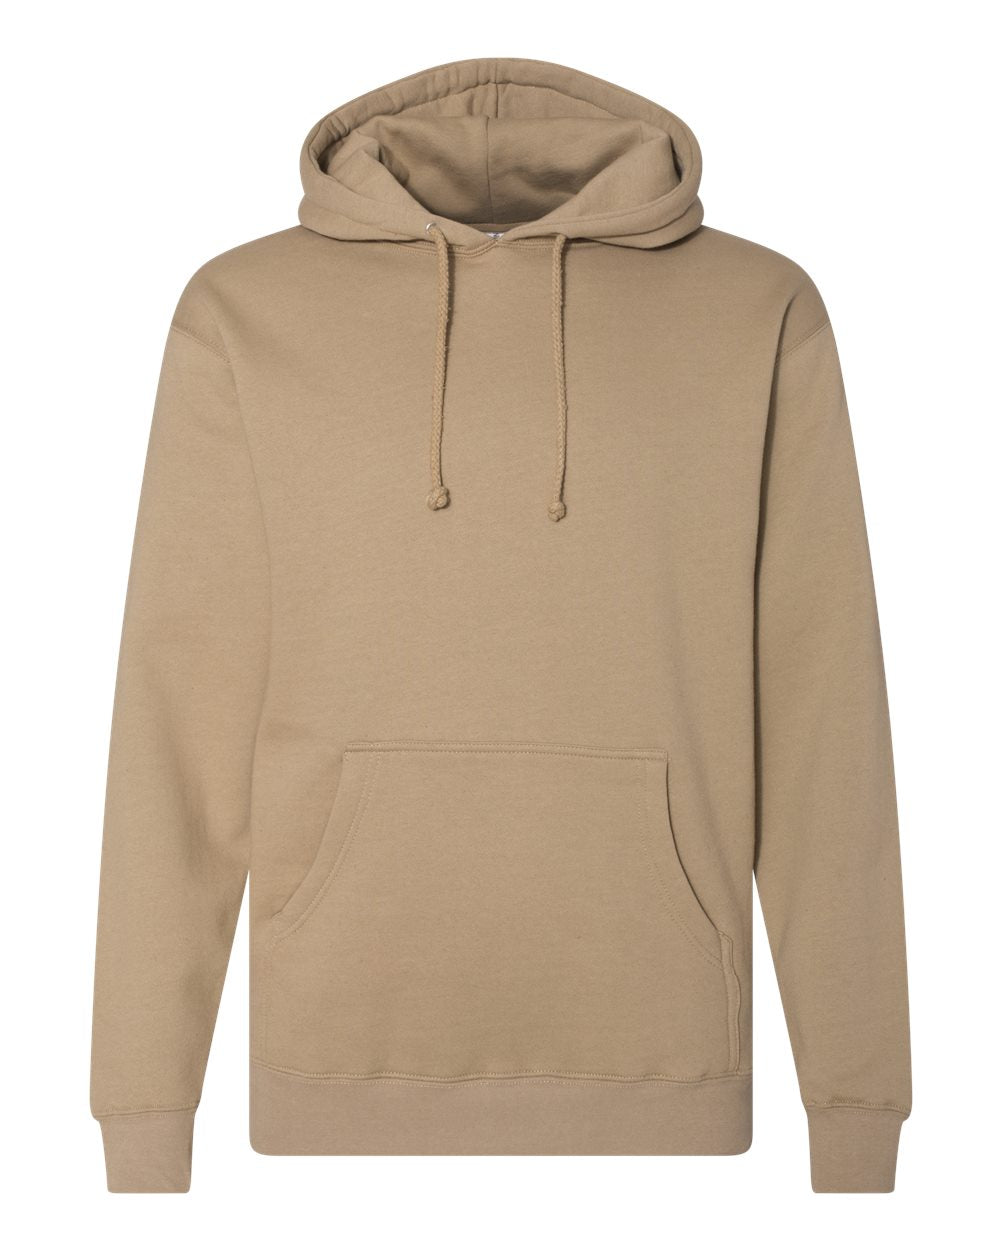 Independent Trading Co. Heavyweight Hooded Sweatshirt IND4000 #color_Sandstone